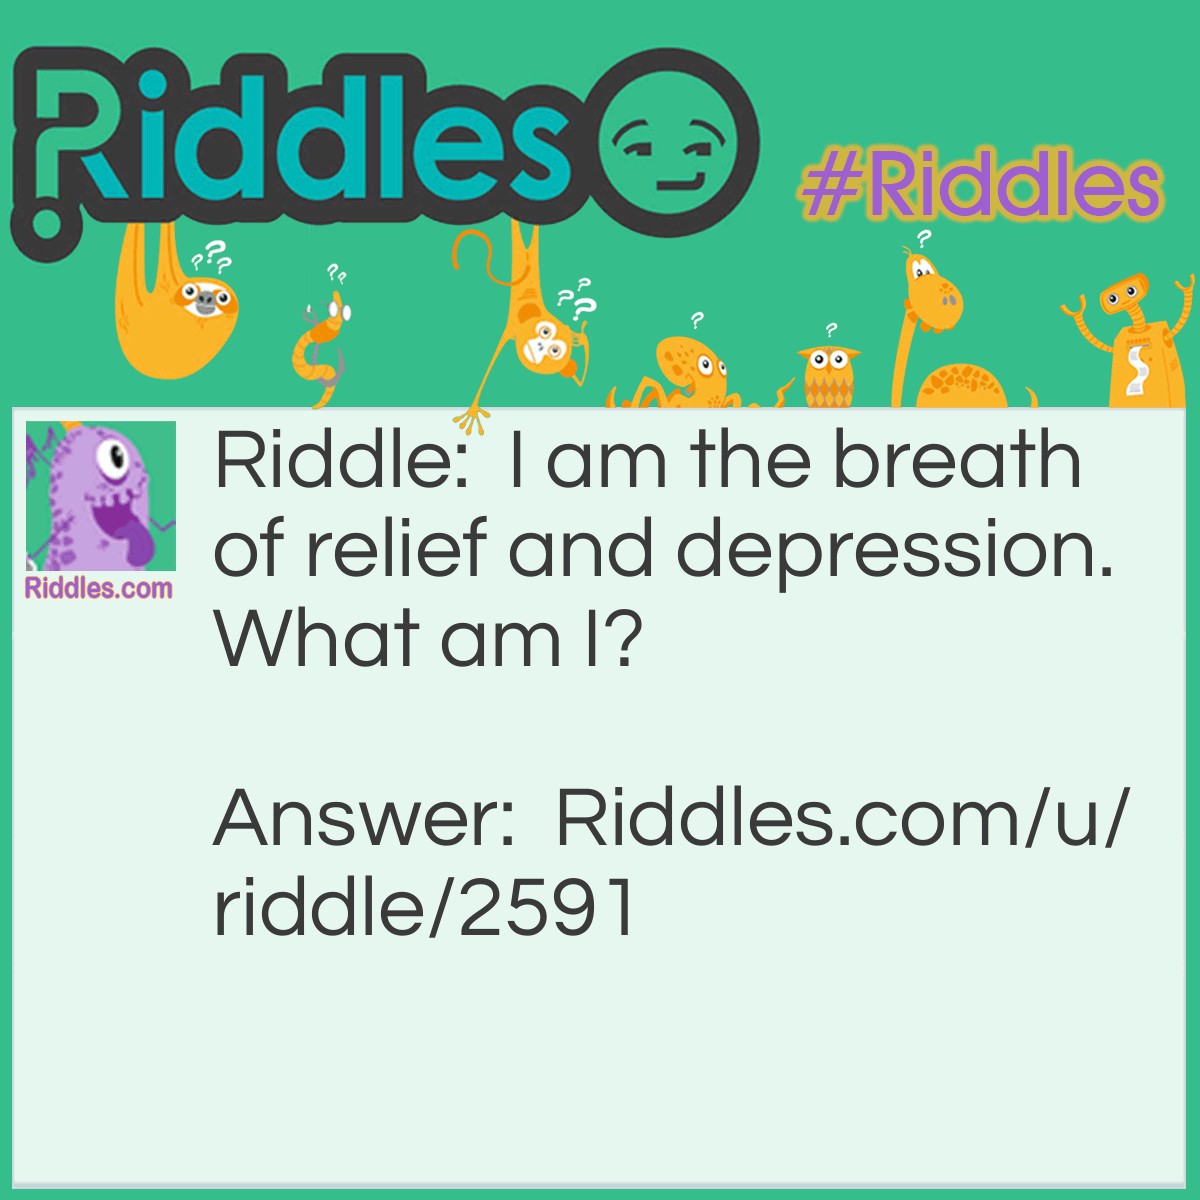 Riddle: I am the breath of relief and depression. What am I? Answer: A sigh.